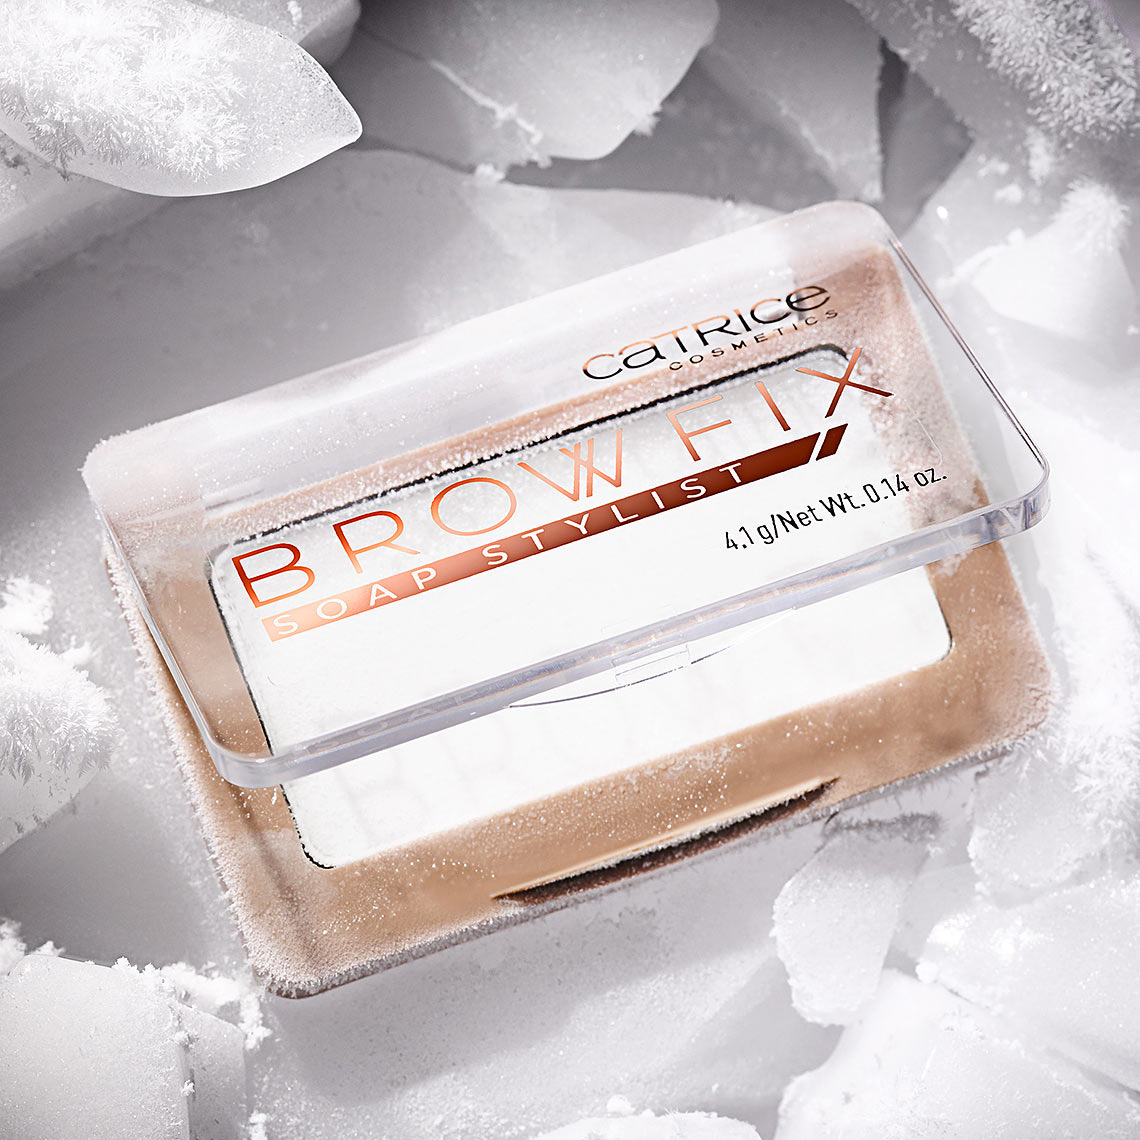 frozen cosmetic product photography • Marc Wuchner • Cosmetic and Texture Photographer